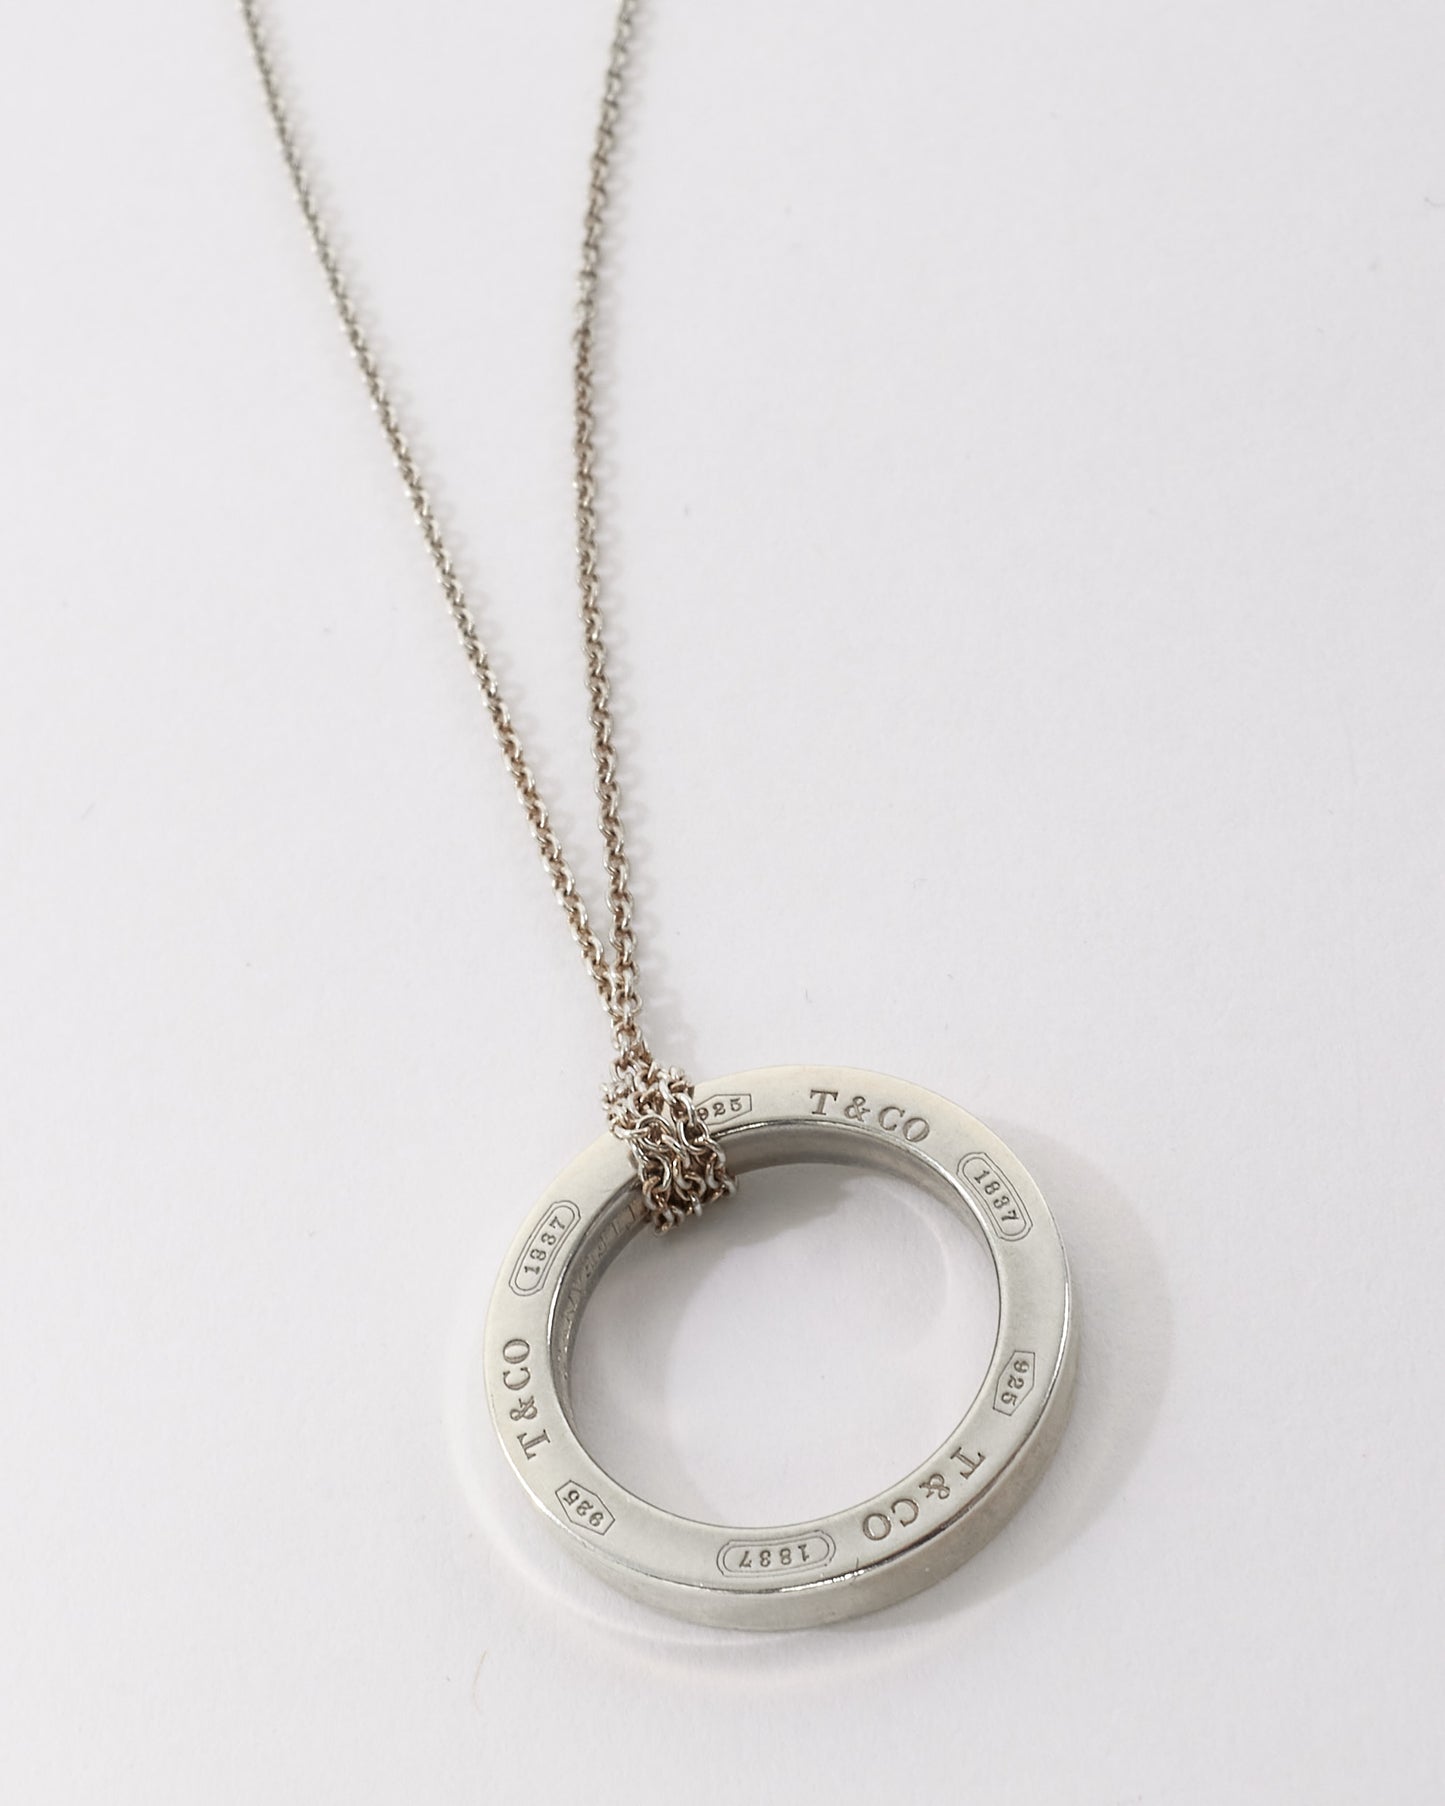 Tiffany & Co. 1837 Silver Ring Pendant Necklace